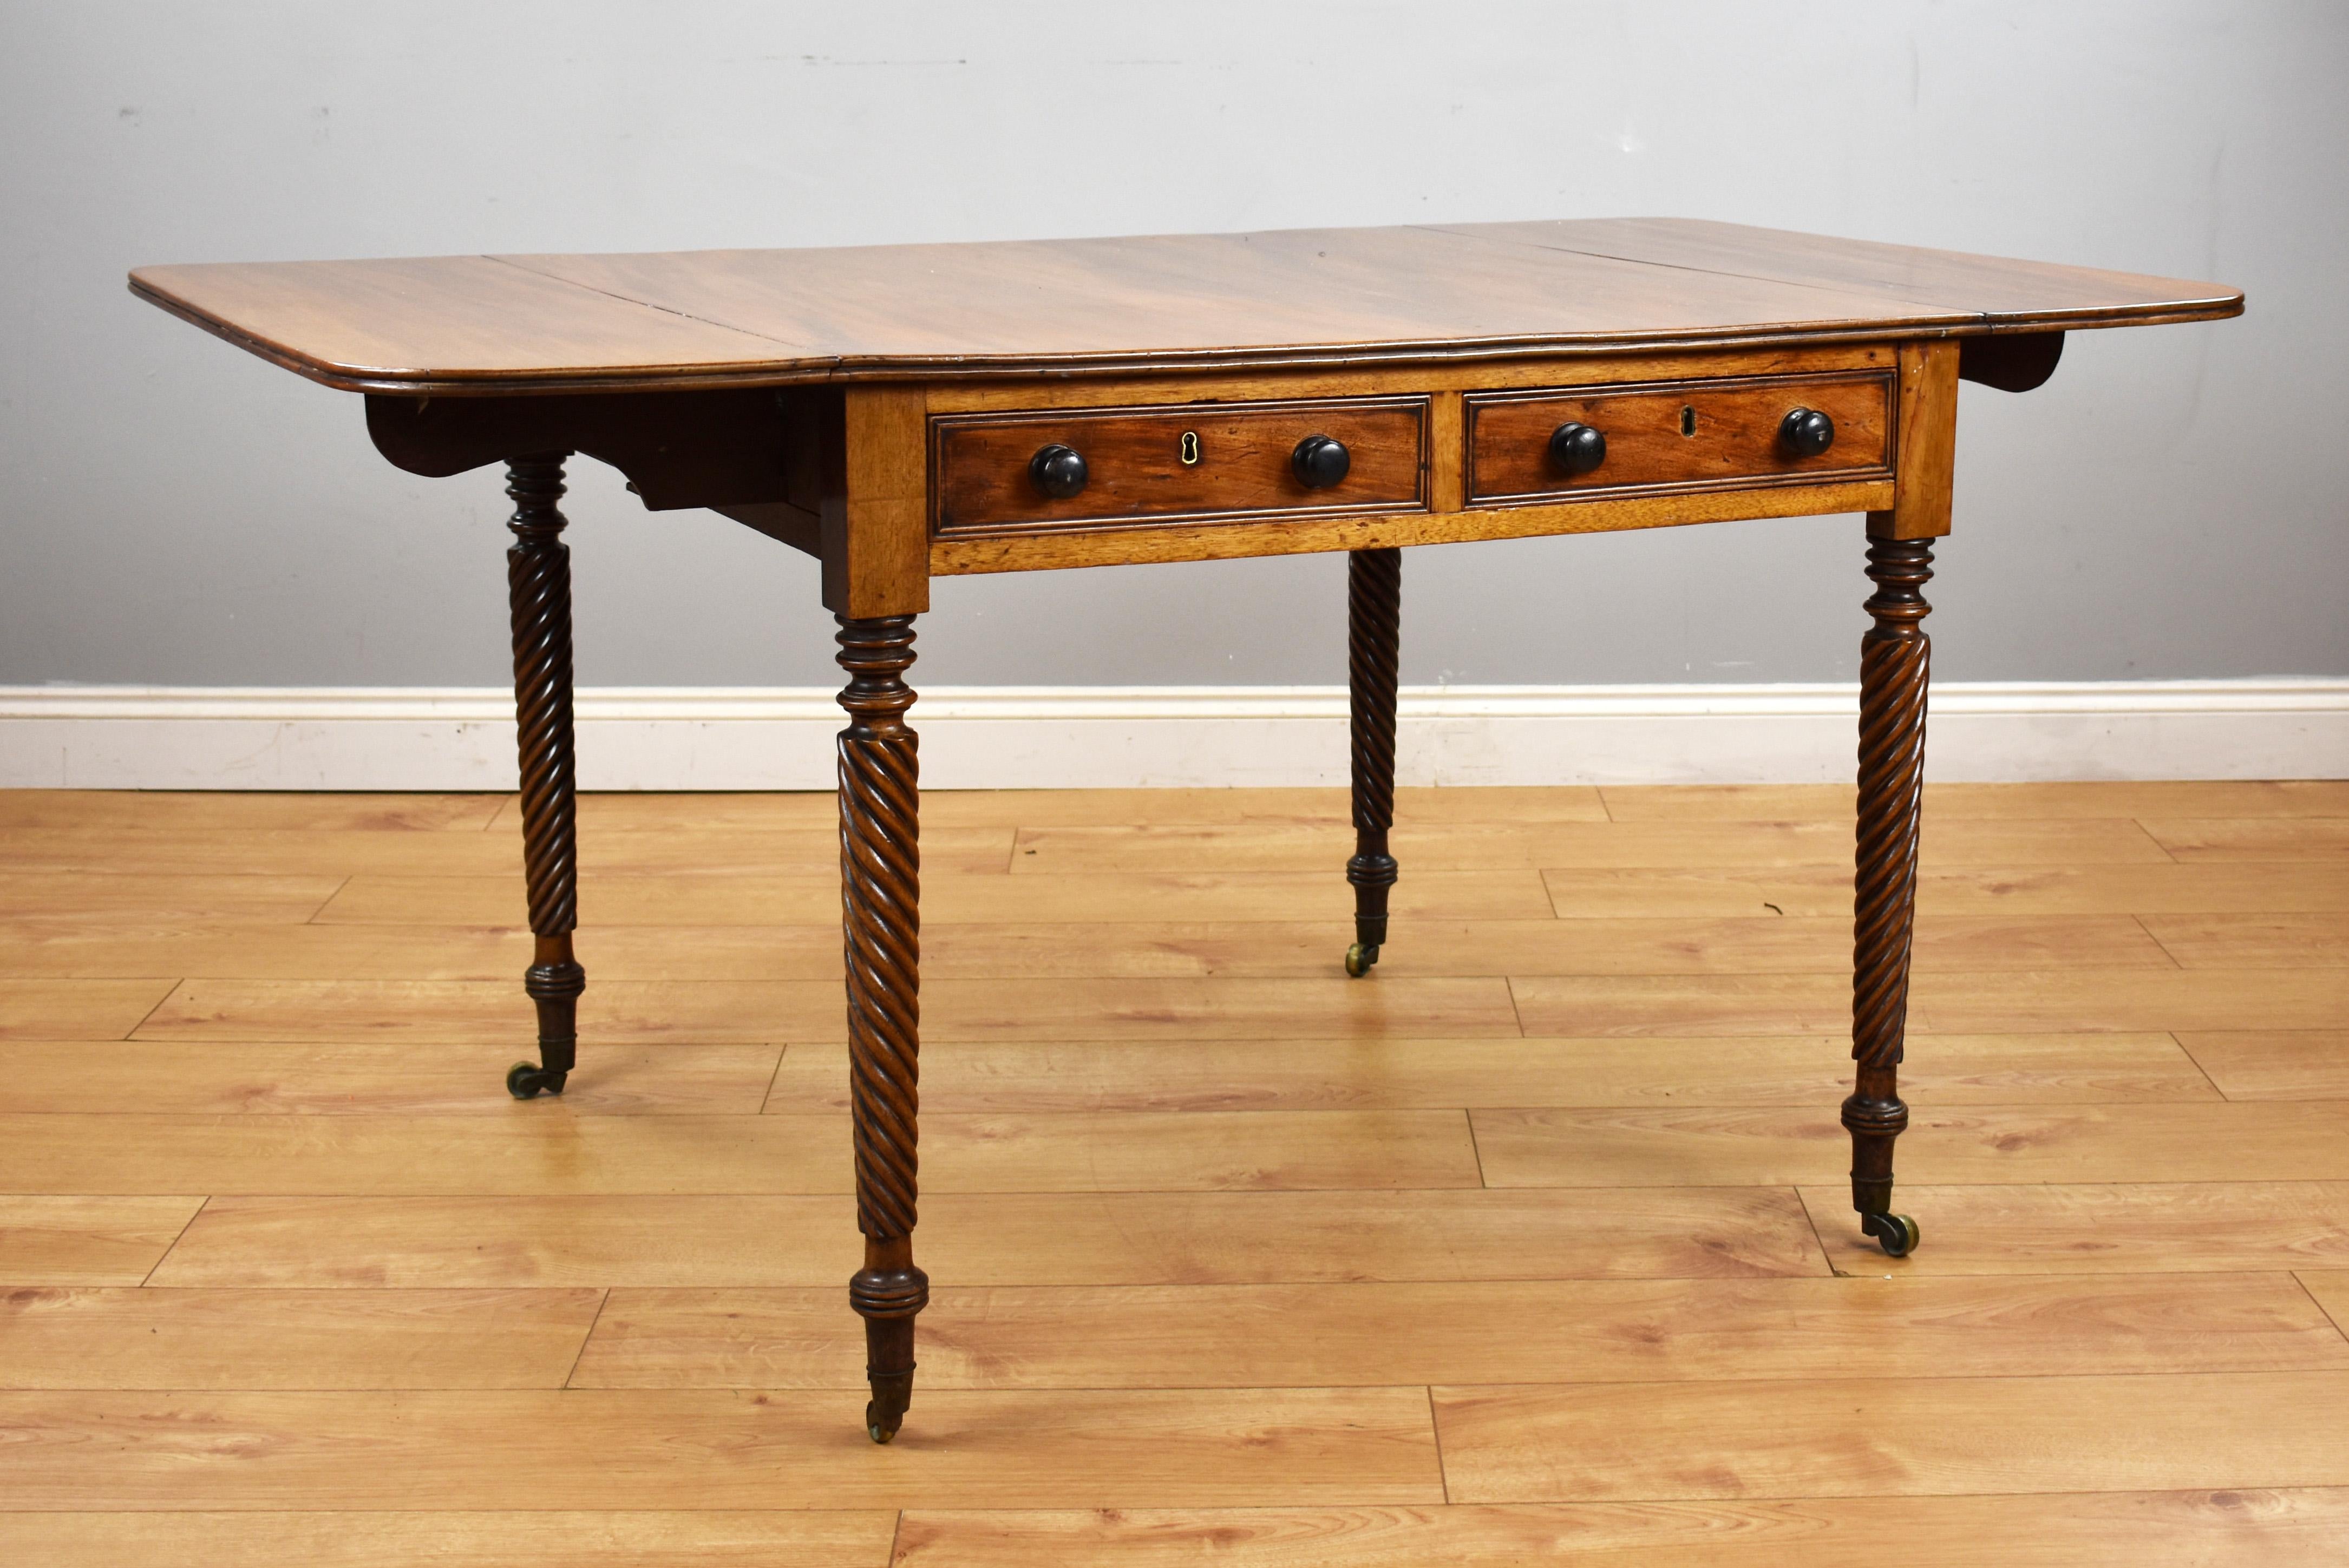 For sale is a Regency mahogany drop-leaf table, having two drawers to the front and two faux drawers to the opposing side, raised on superbly turned legs terminating on castors. The table remains in good untouched condition, showing signs of wear